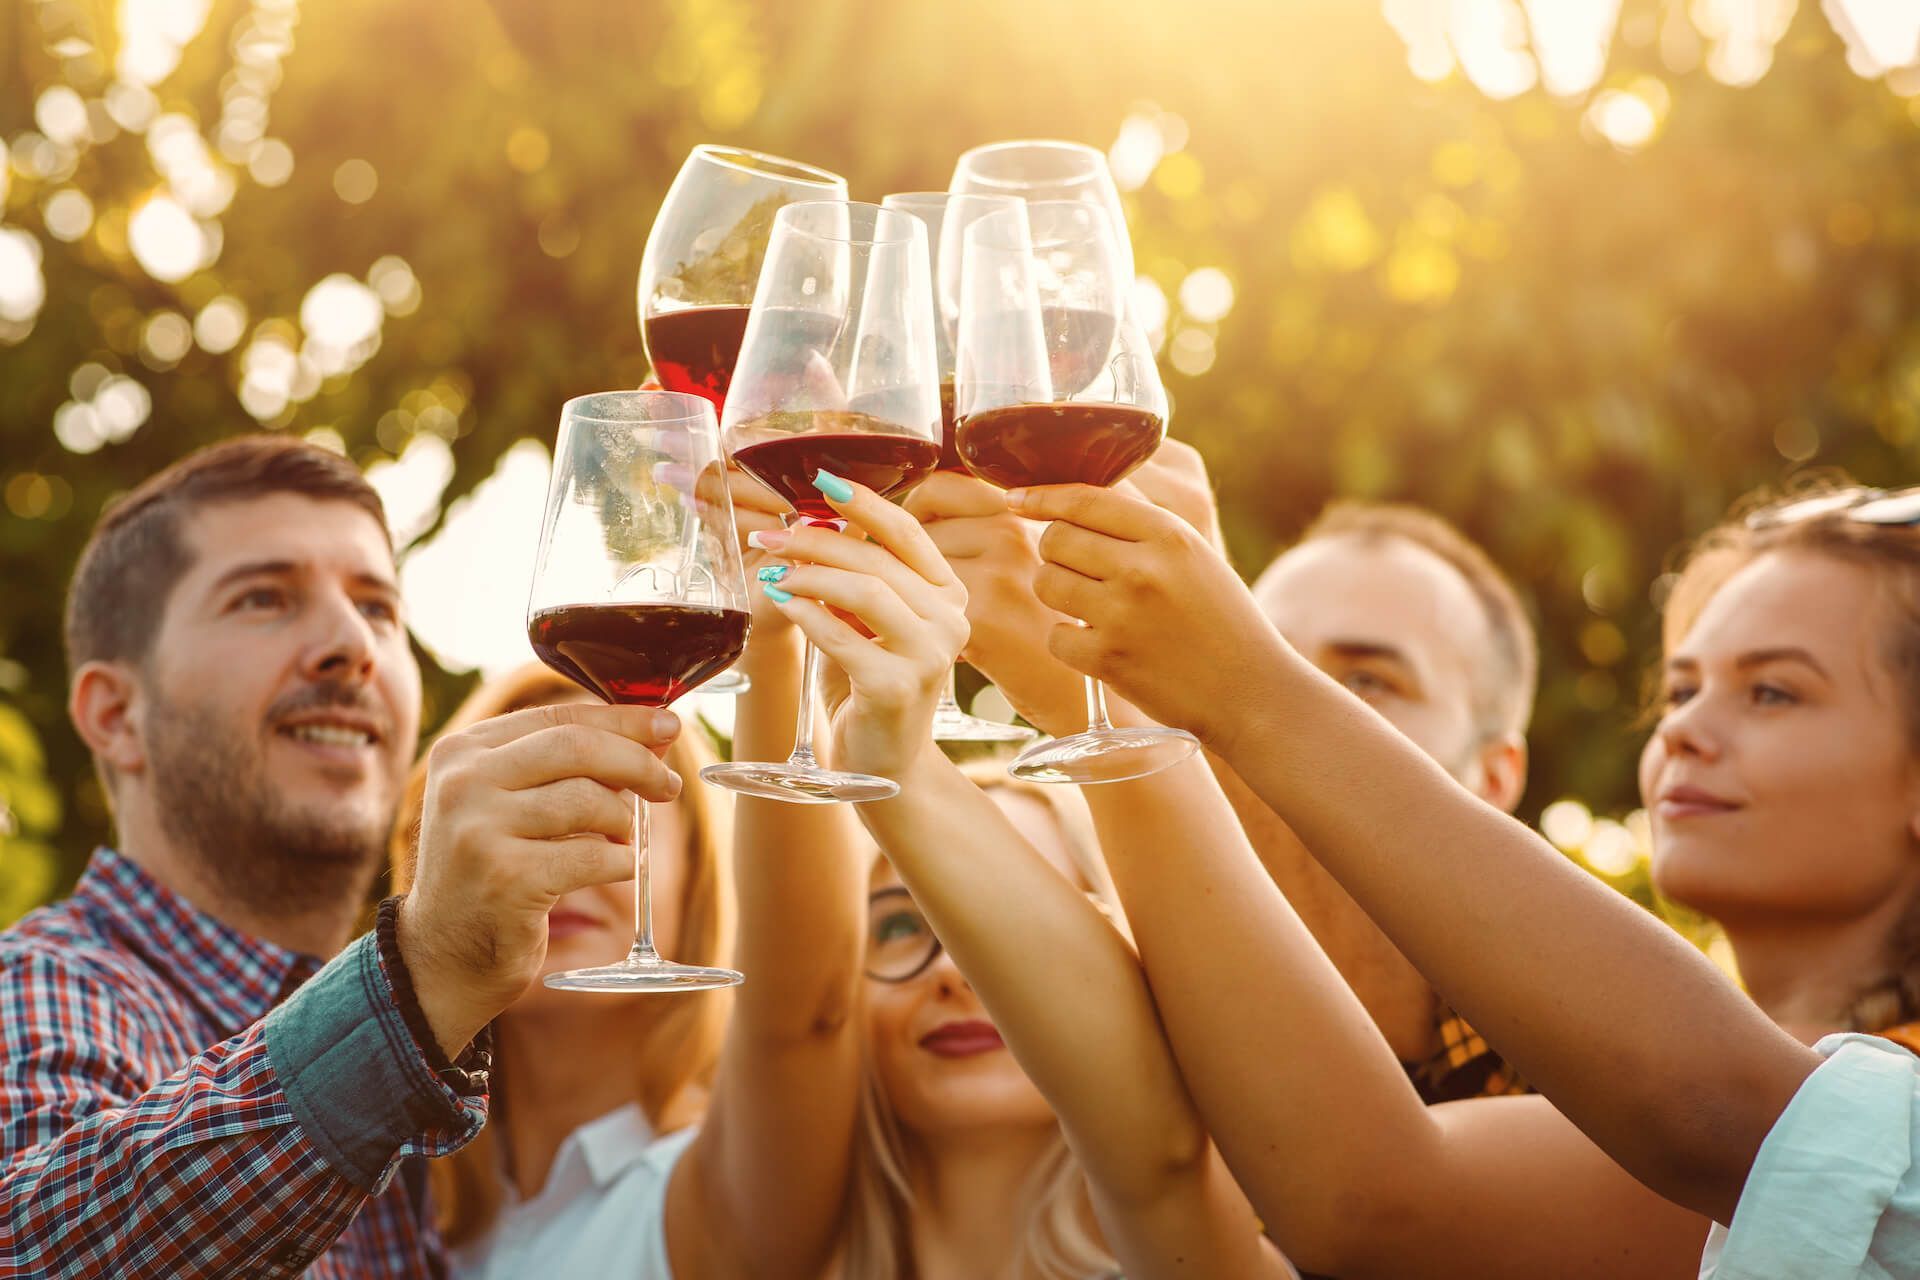 A group of people are toasting with wine glasses.